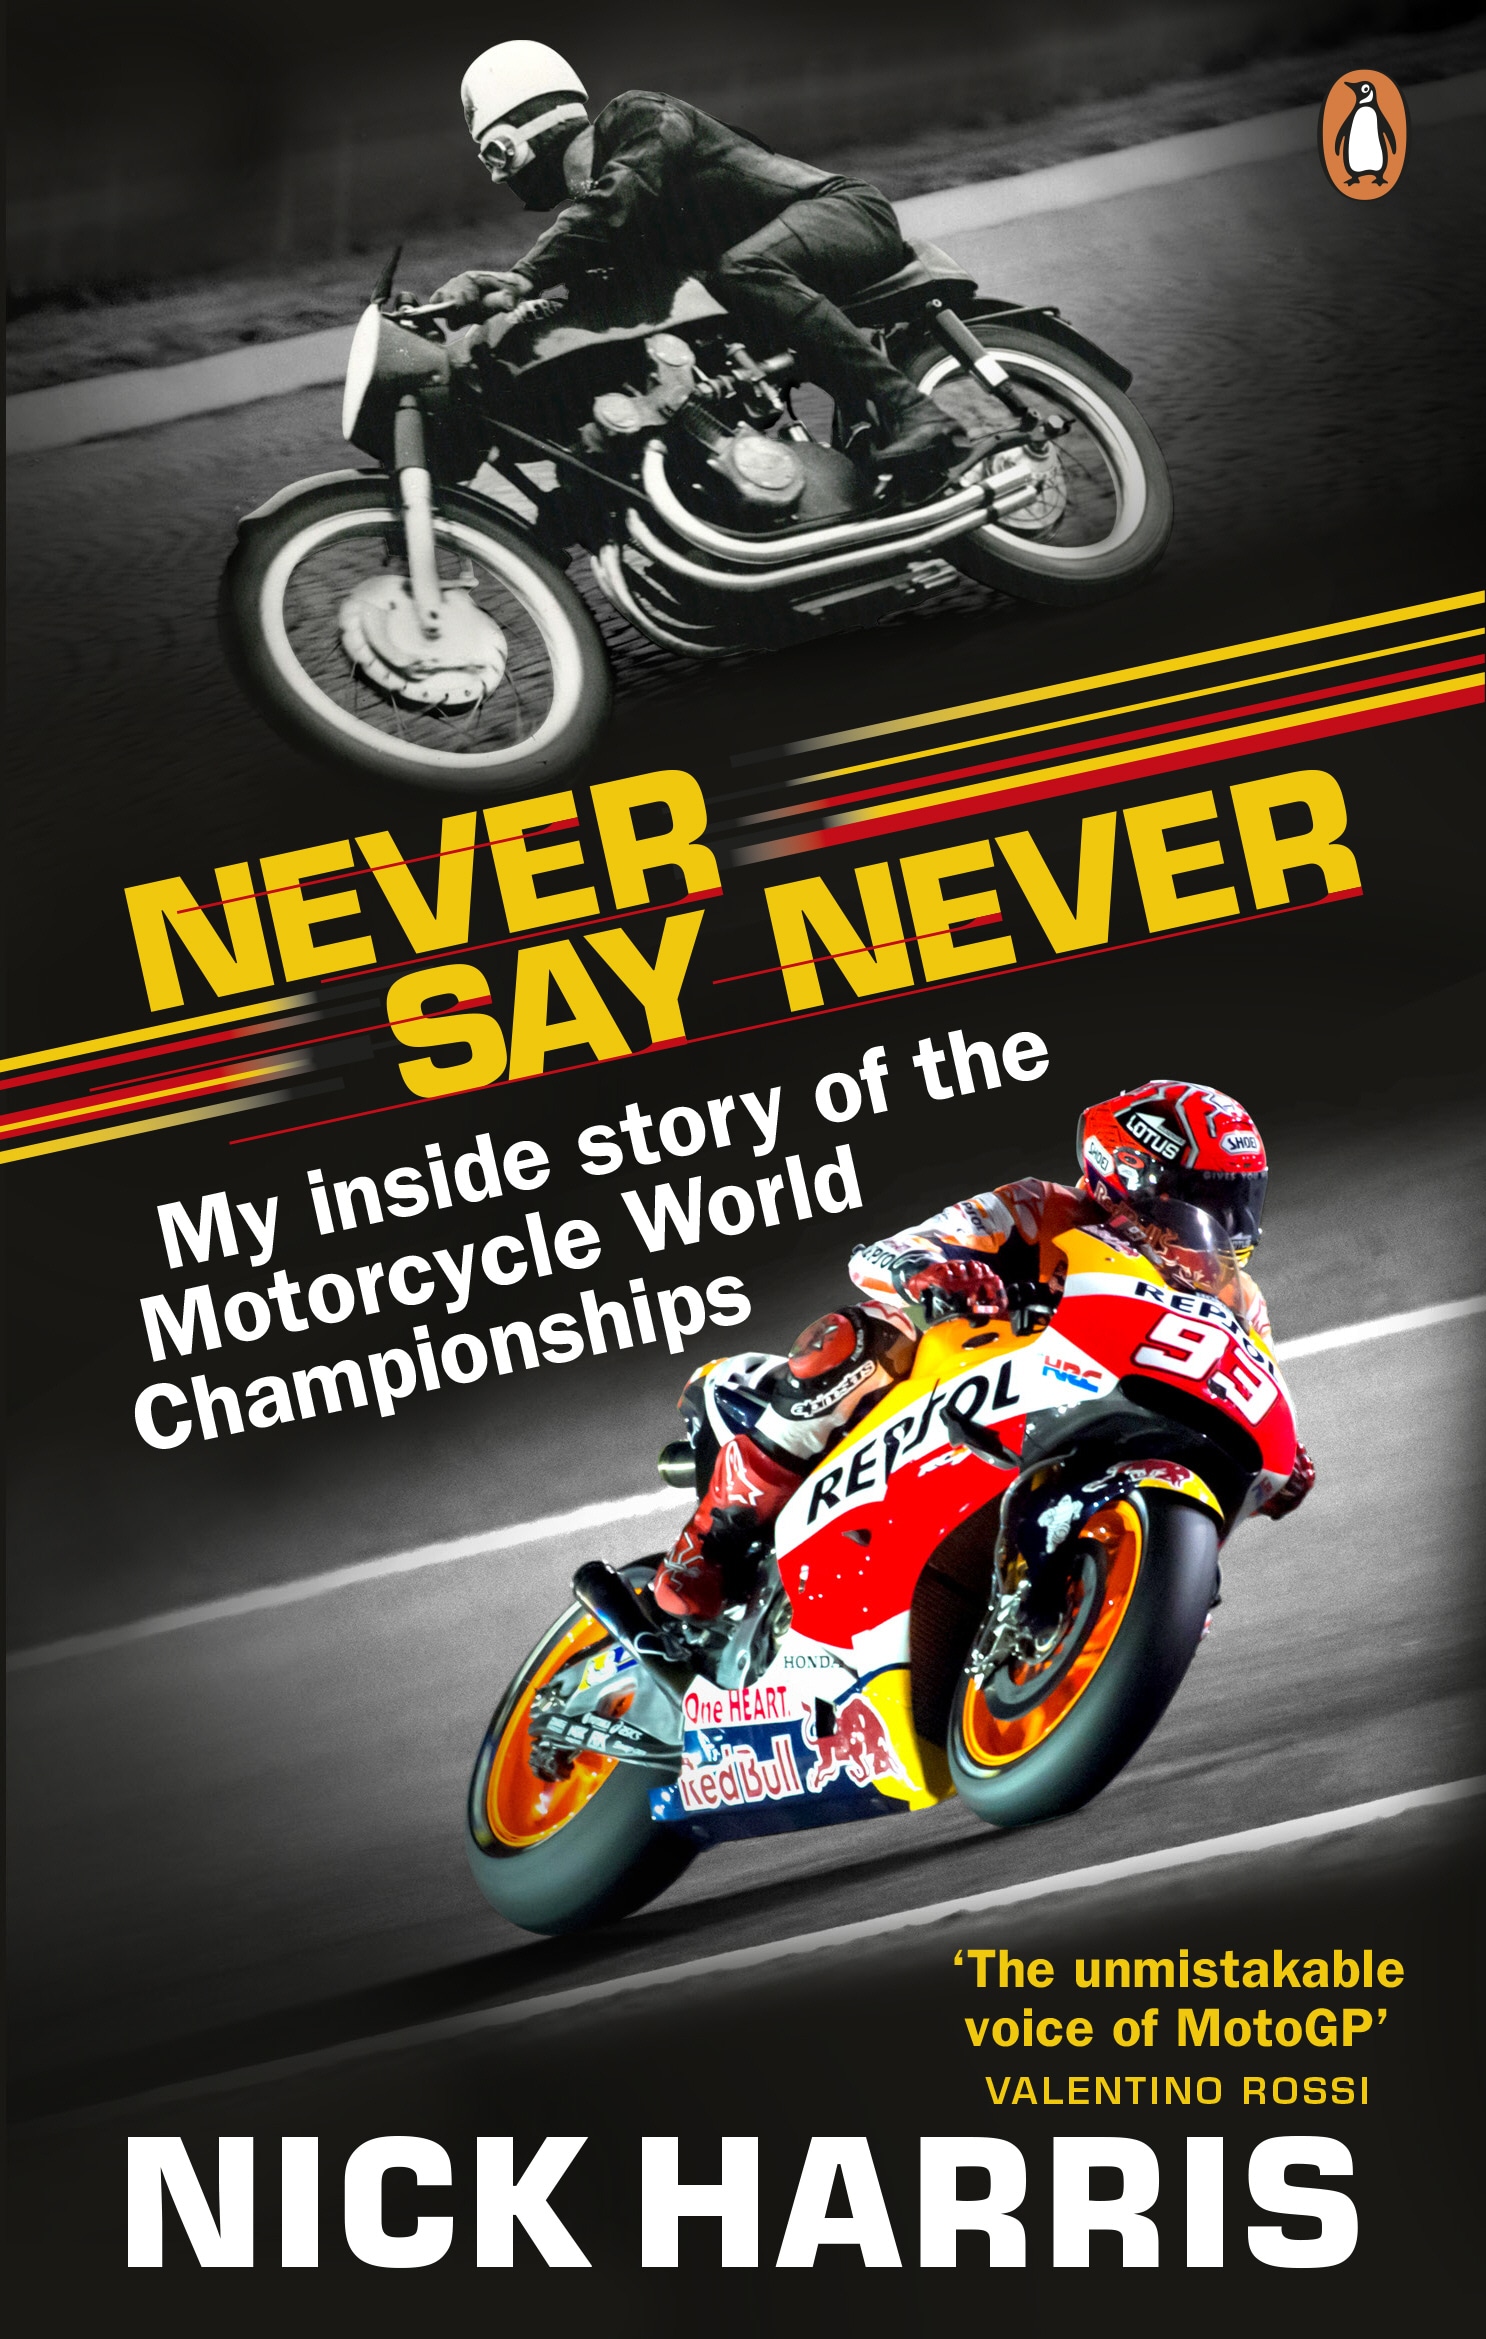 Book “Never Say Never” by Nick Harris — February 13, 2020